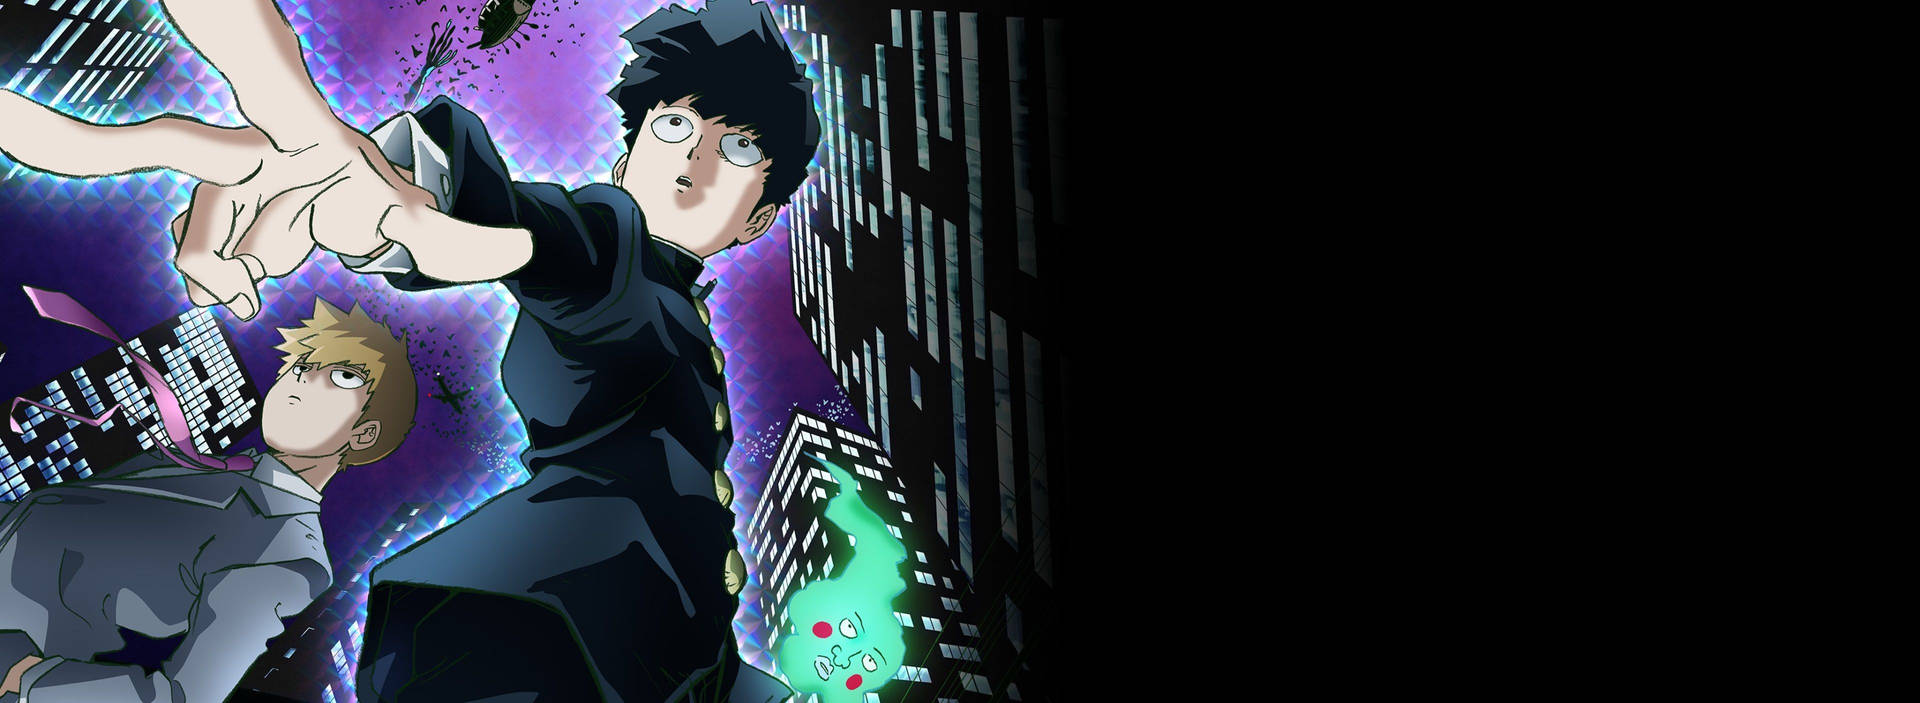 "Crash the walls of reality with Mob Psycho 100" Wallpaper